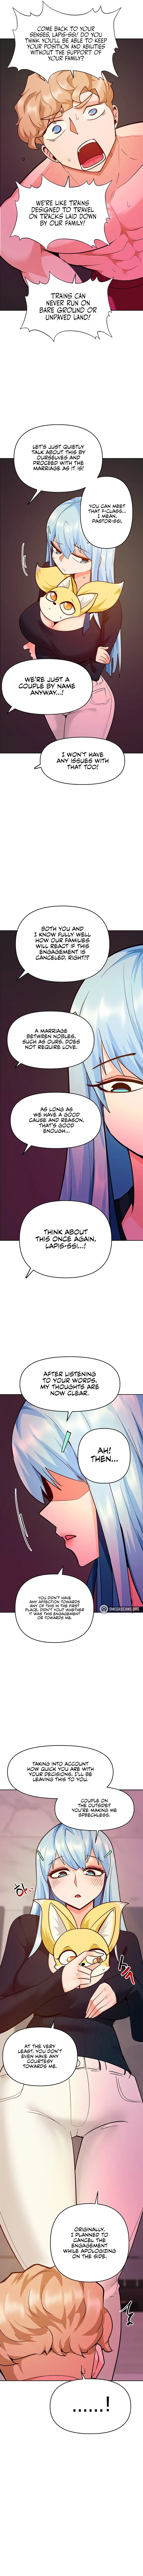 the-hypnosis-app-was-fake-chap-43-4